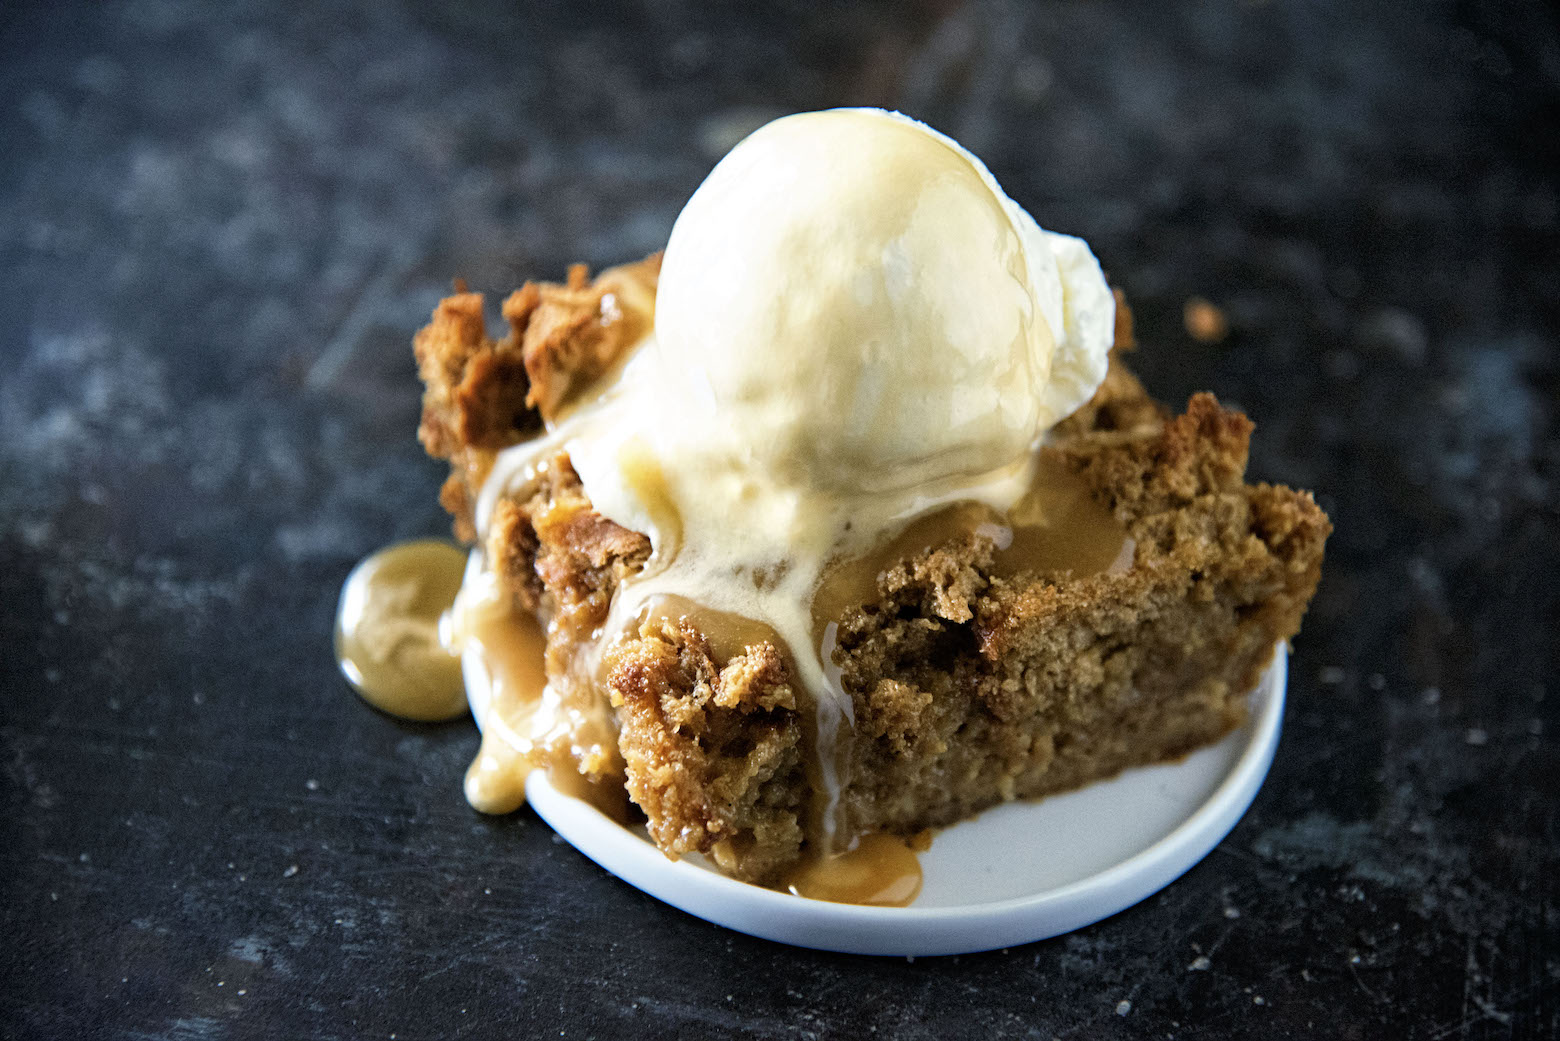 Side view of gingerbread bread pudding with sauce and ice cream dripping down.